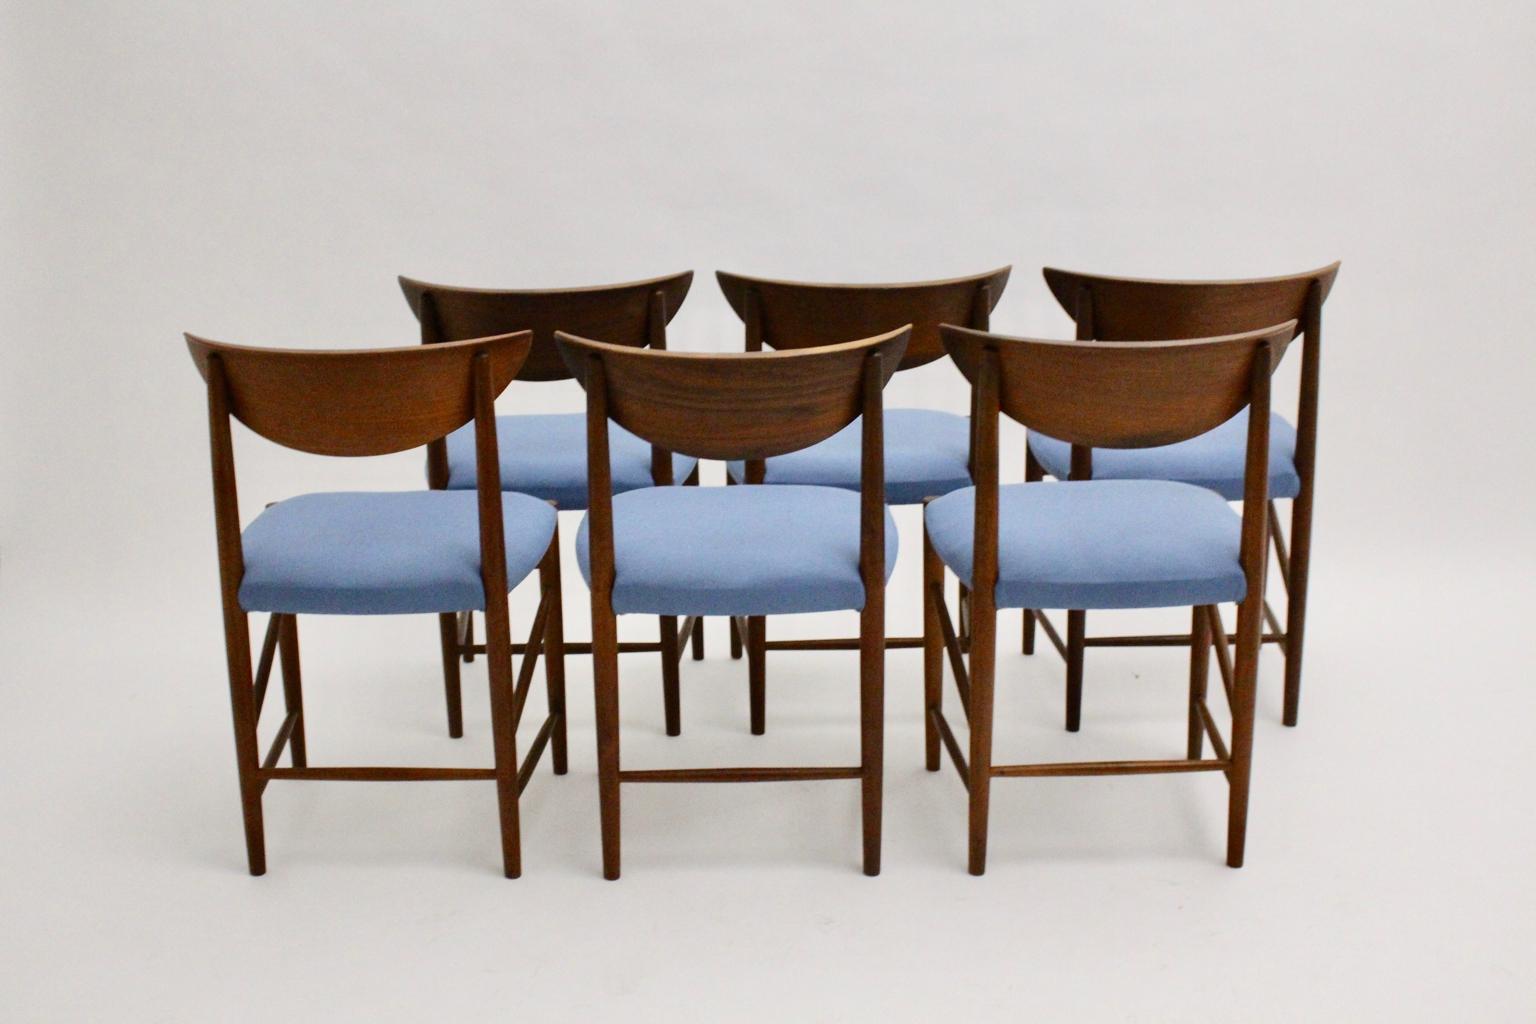 Scandinavian Modern vintage organic dining chairs or chairs from teak designed by Peter Hvidt and Orla Moolgard Nielsenfor Søborg Mobler DK, circa 1956.
These wonderful dining chairs feature a sculptural teak frame with beautiful warm wooden tone,